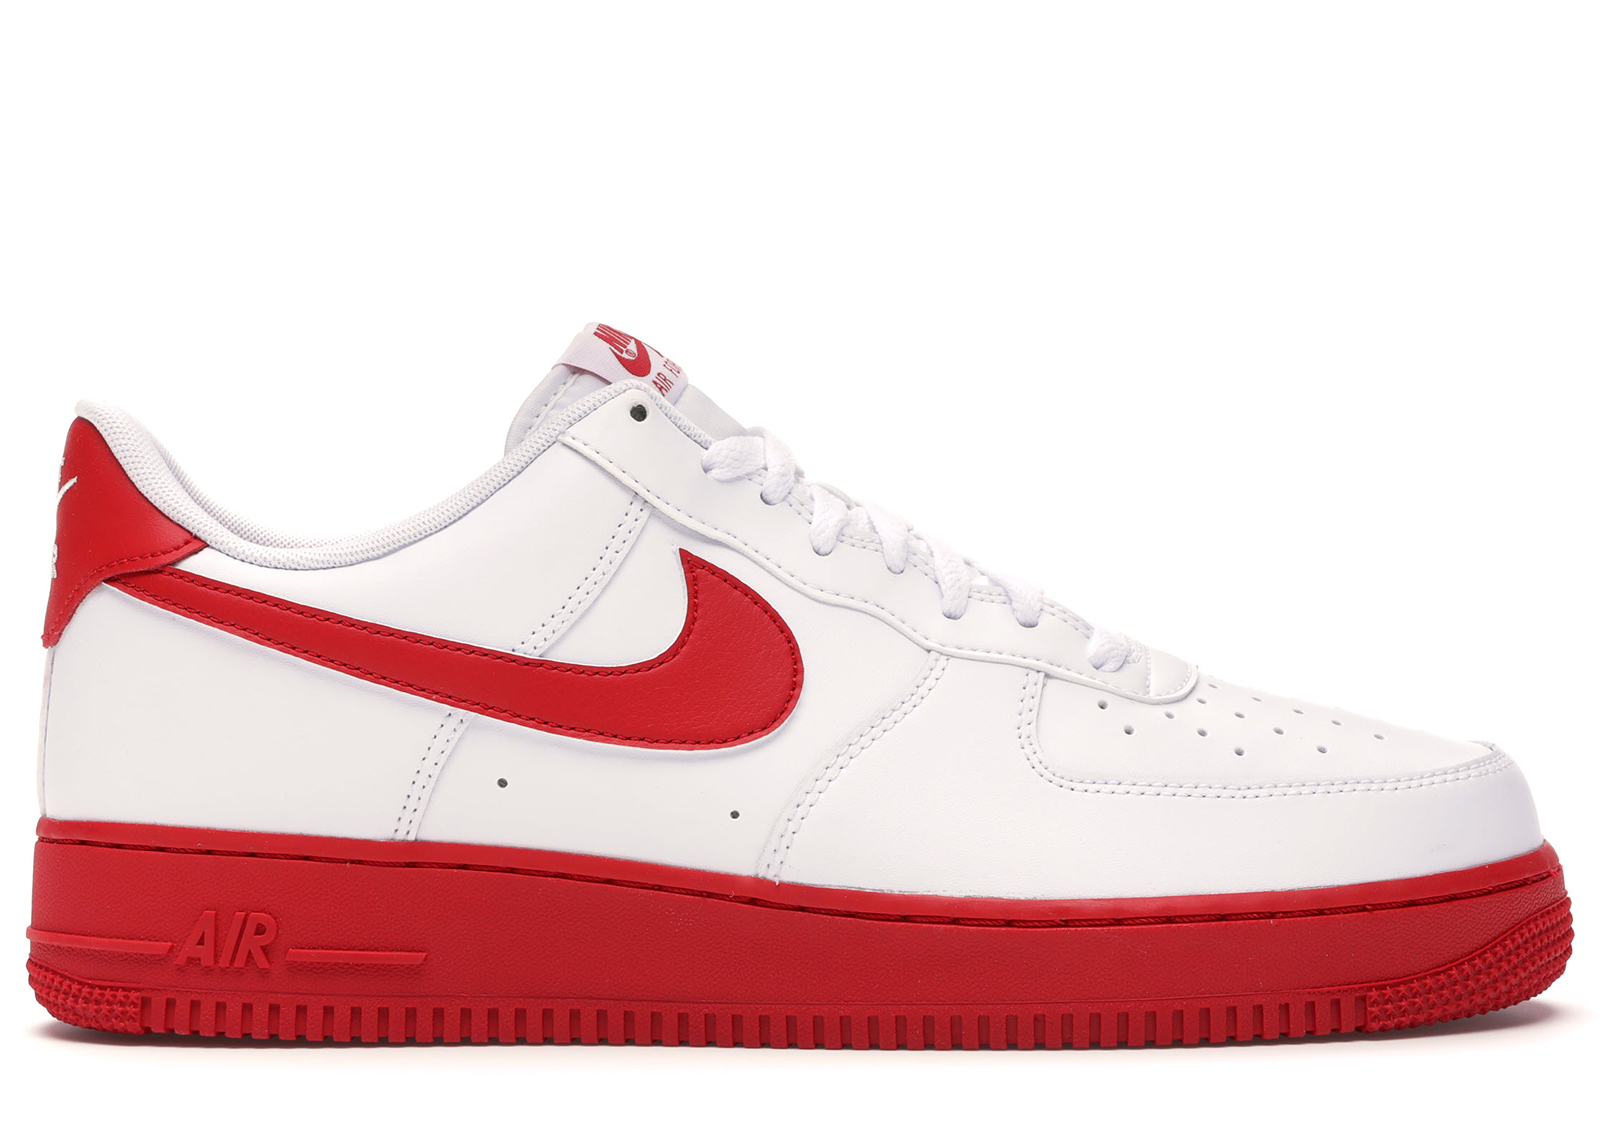 nike air force 1 low blanche et rouge صور خصوه